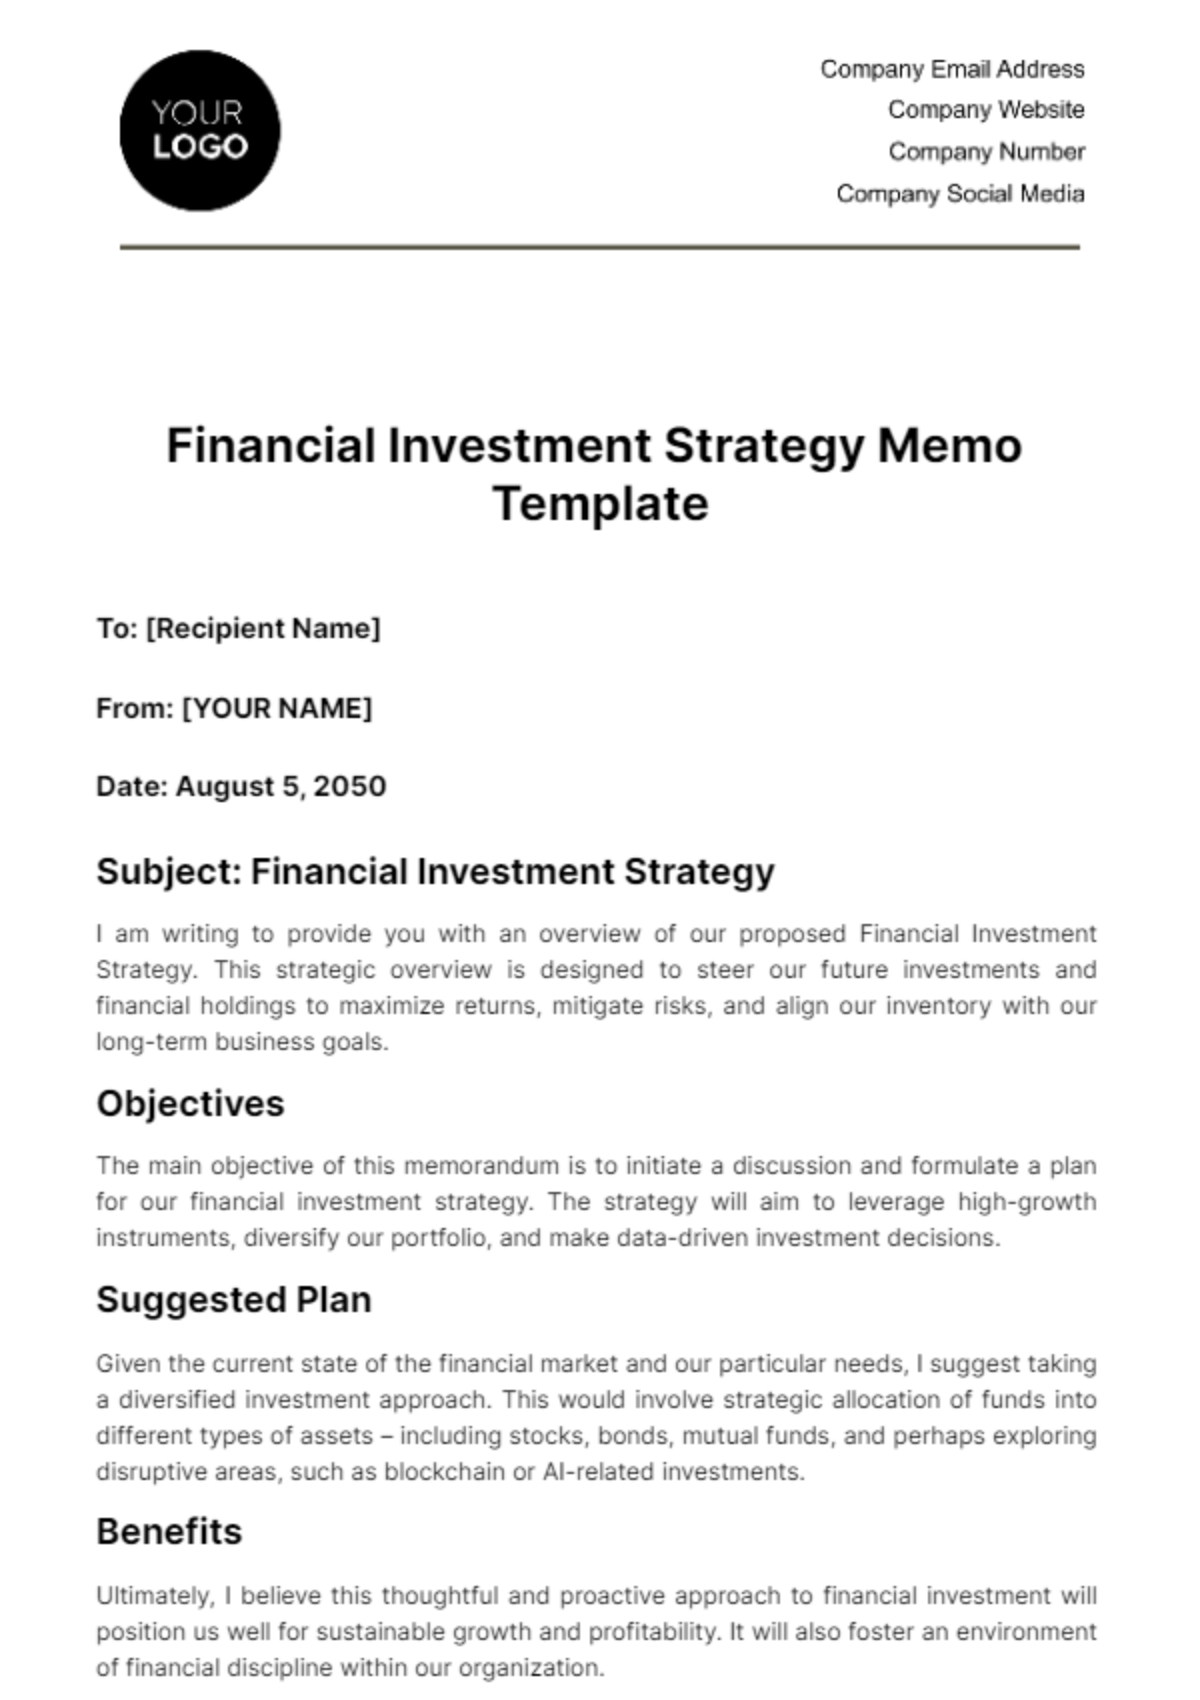 Free Financial Investment Strategy Memo Template